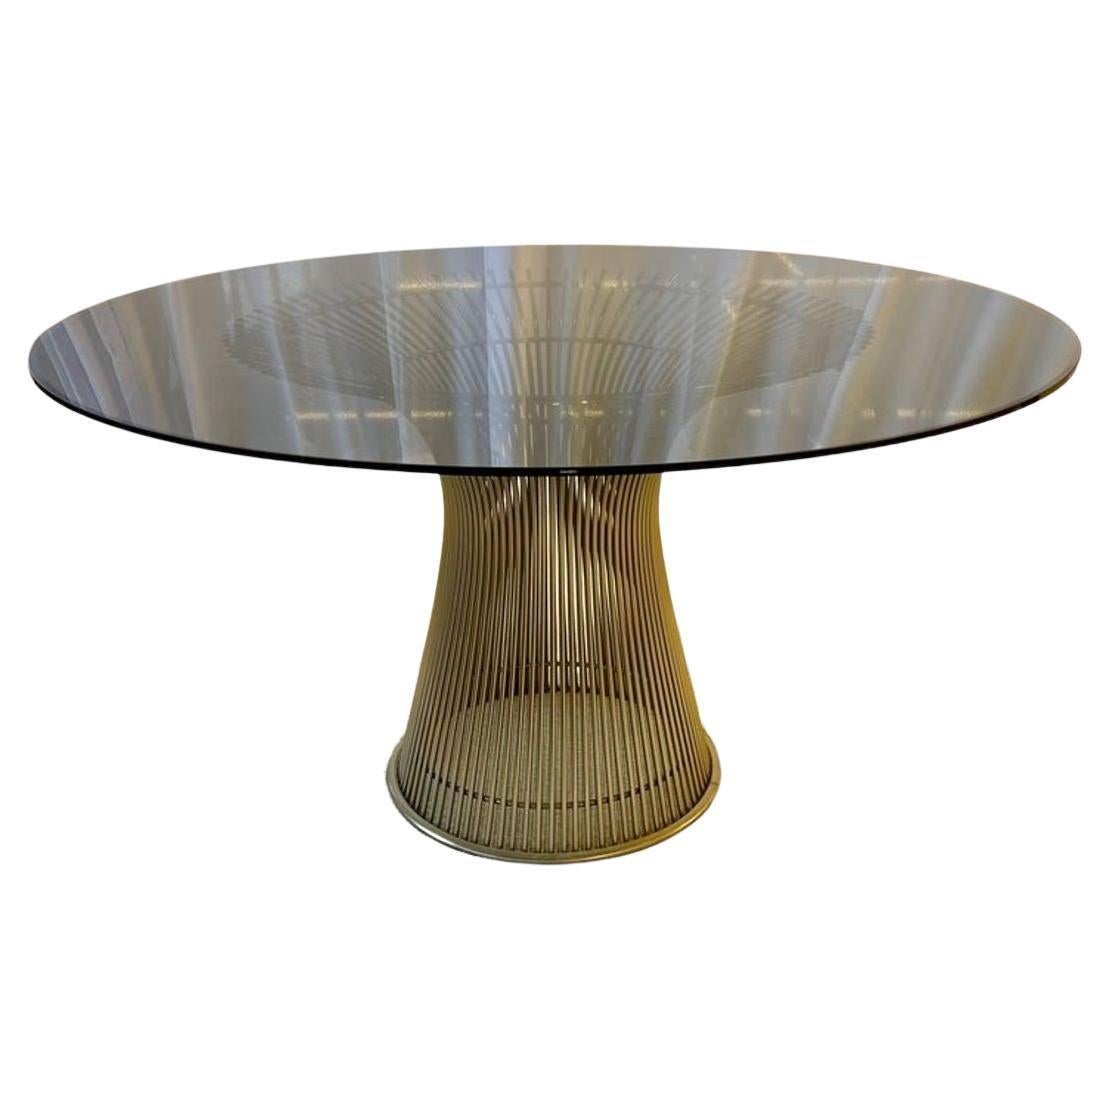 Round Smoked Glass Mid-Century Modern Warren Platner for Knoll Dining Room Table